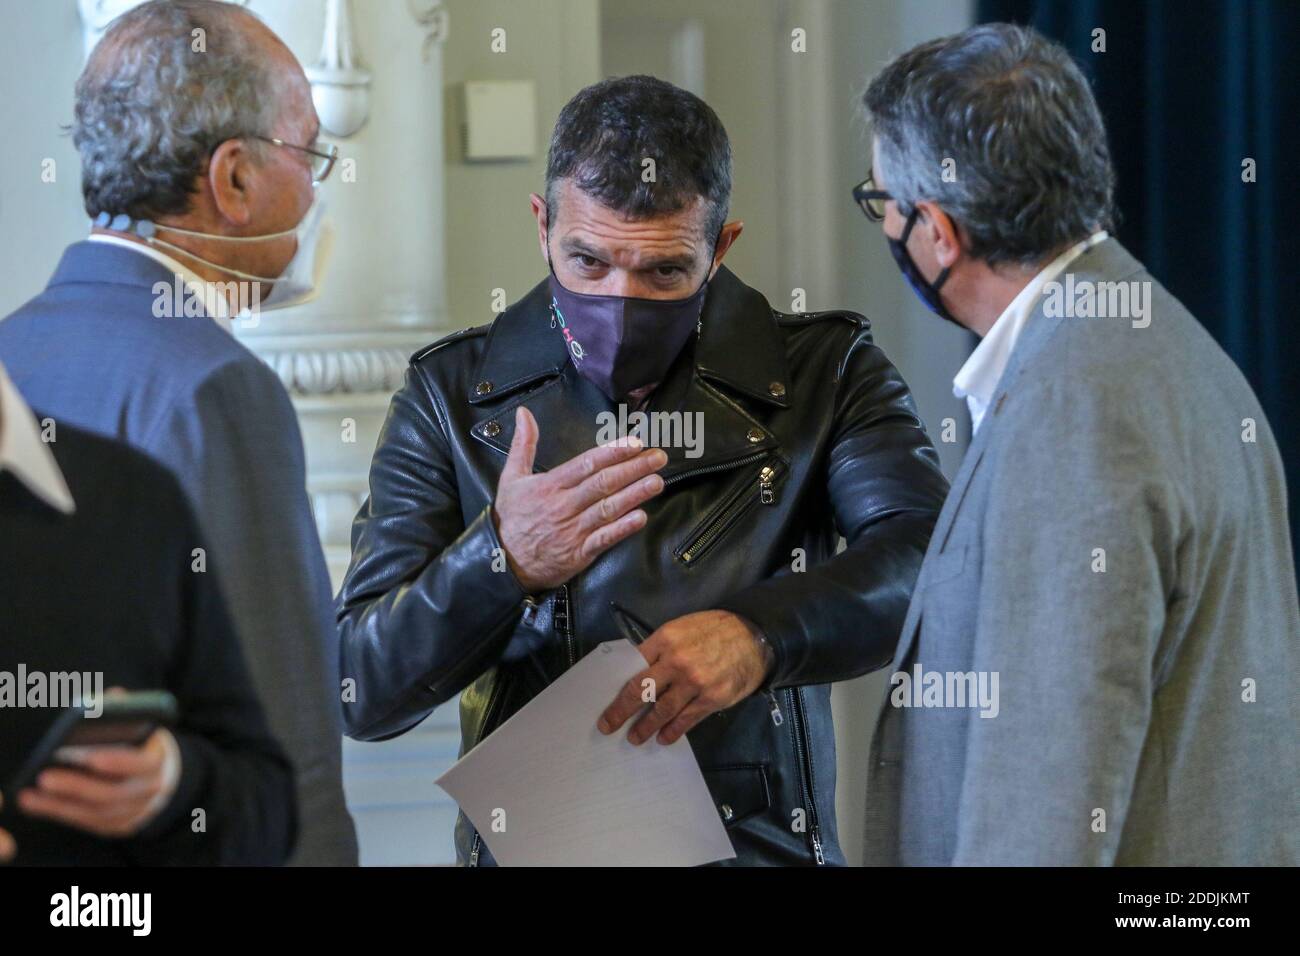 November 25, 2020: November 25, 2020 (Malaga) The Malaga actor Antonio Banderas was interviewed today in the hall of mirrors of the Malaga city hall by Carlos Alsina and asked : Where were you 30 years ago? '' 30 years ago was arriving in Los Angeles'' Antonio Banderas presents in More than One his new project that presents and directs, 'Scene in Black and White' available on December 15 on Amazon Prime Video Credit: Lorenzo Carnero/ZUMA Wire/Alamy Live News Stock Photo